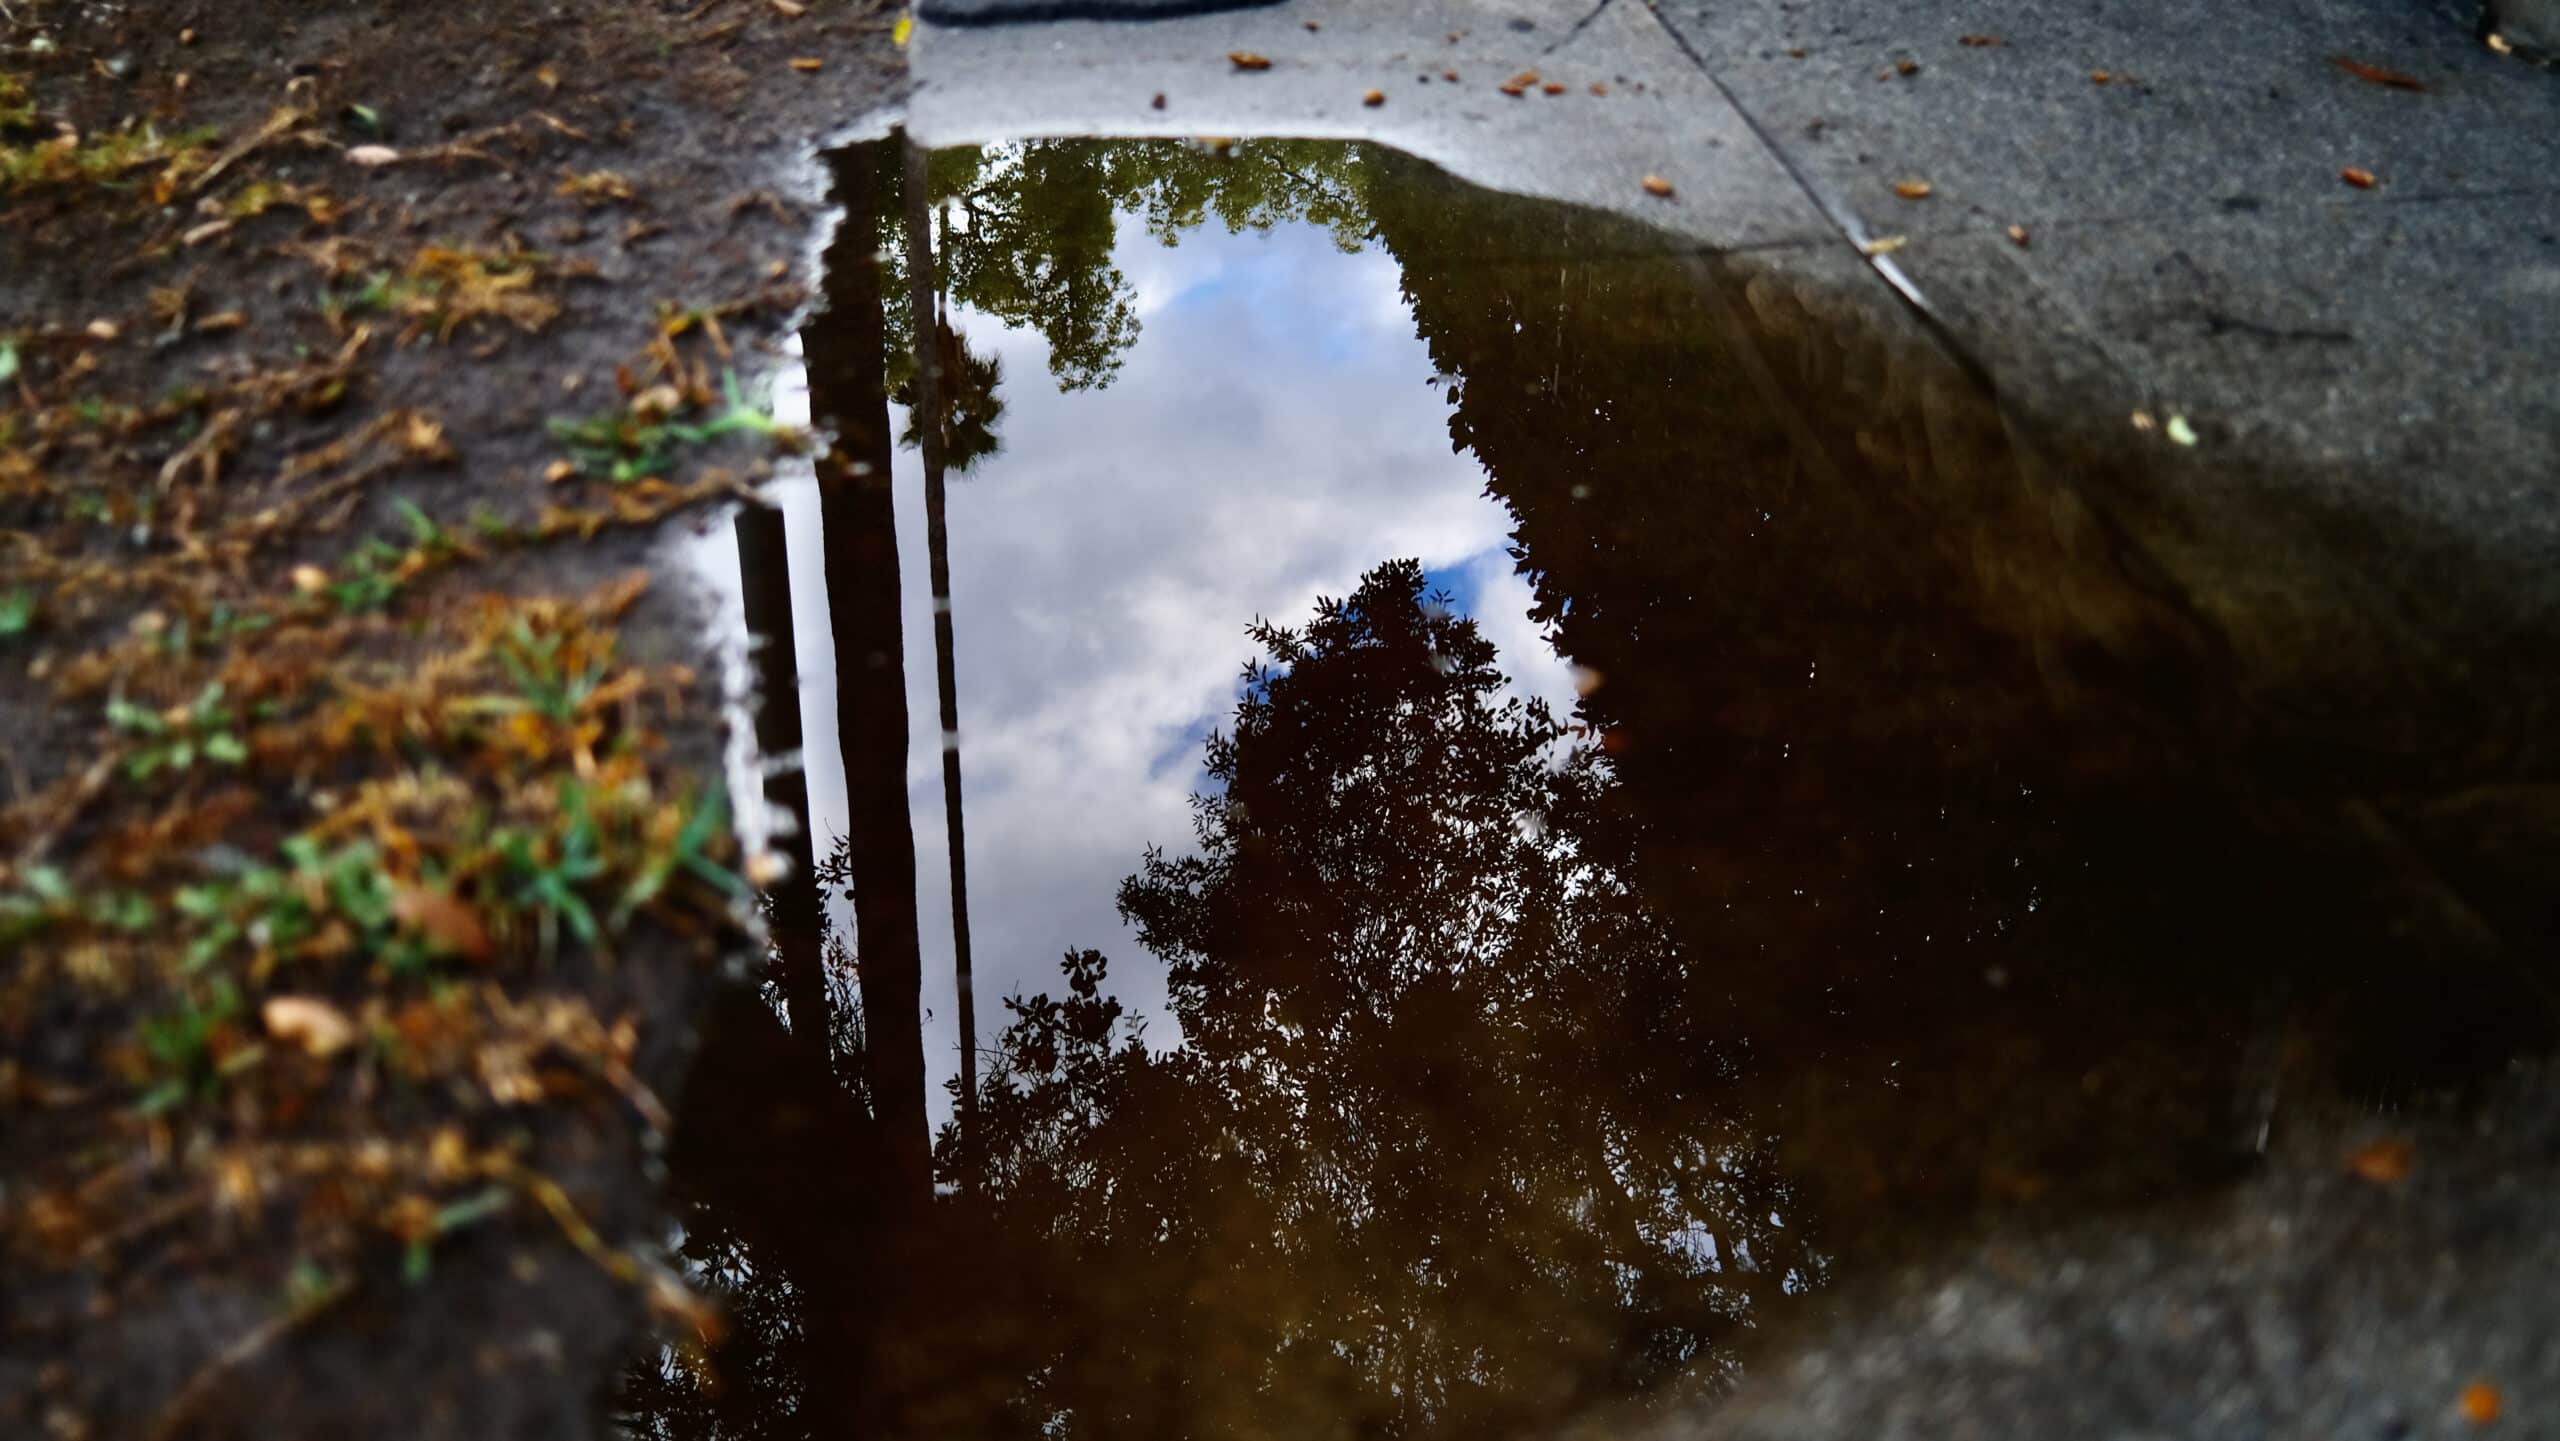 A puddle on the pavement. Around the puddles are scattered leaves. In the puddle are reflection of tall trees and the sky.